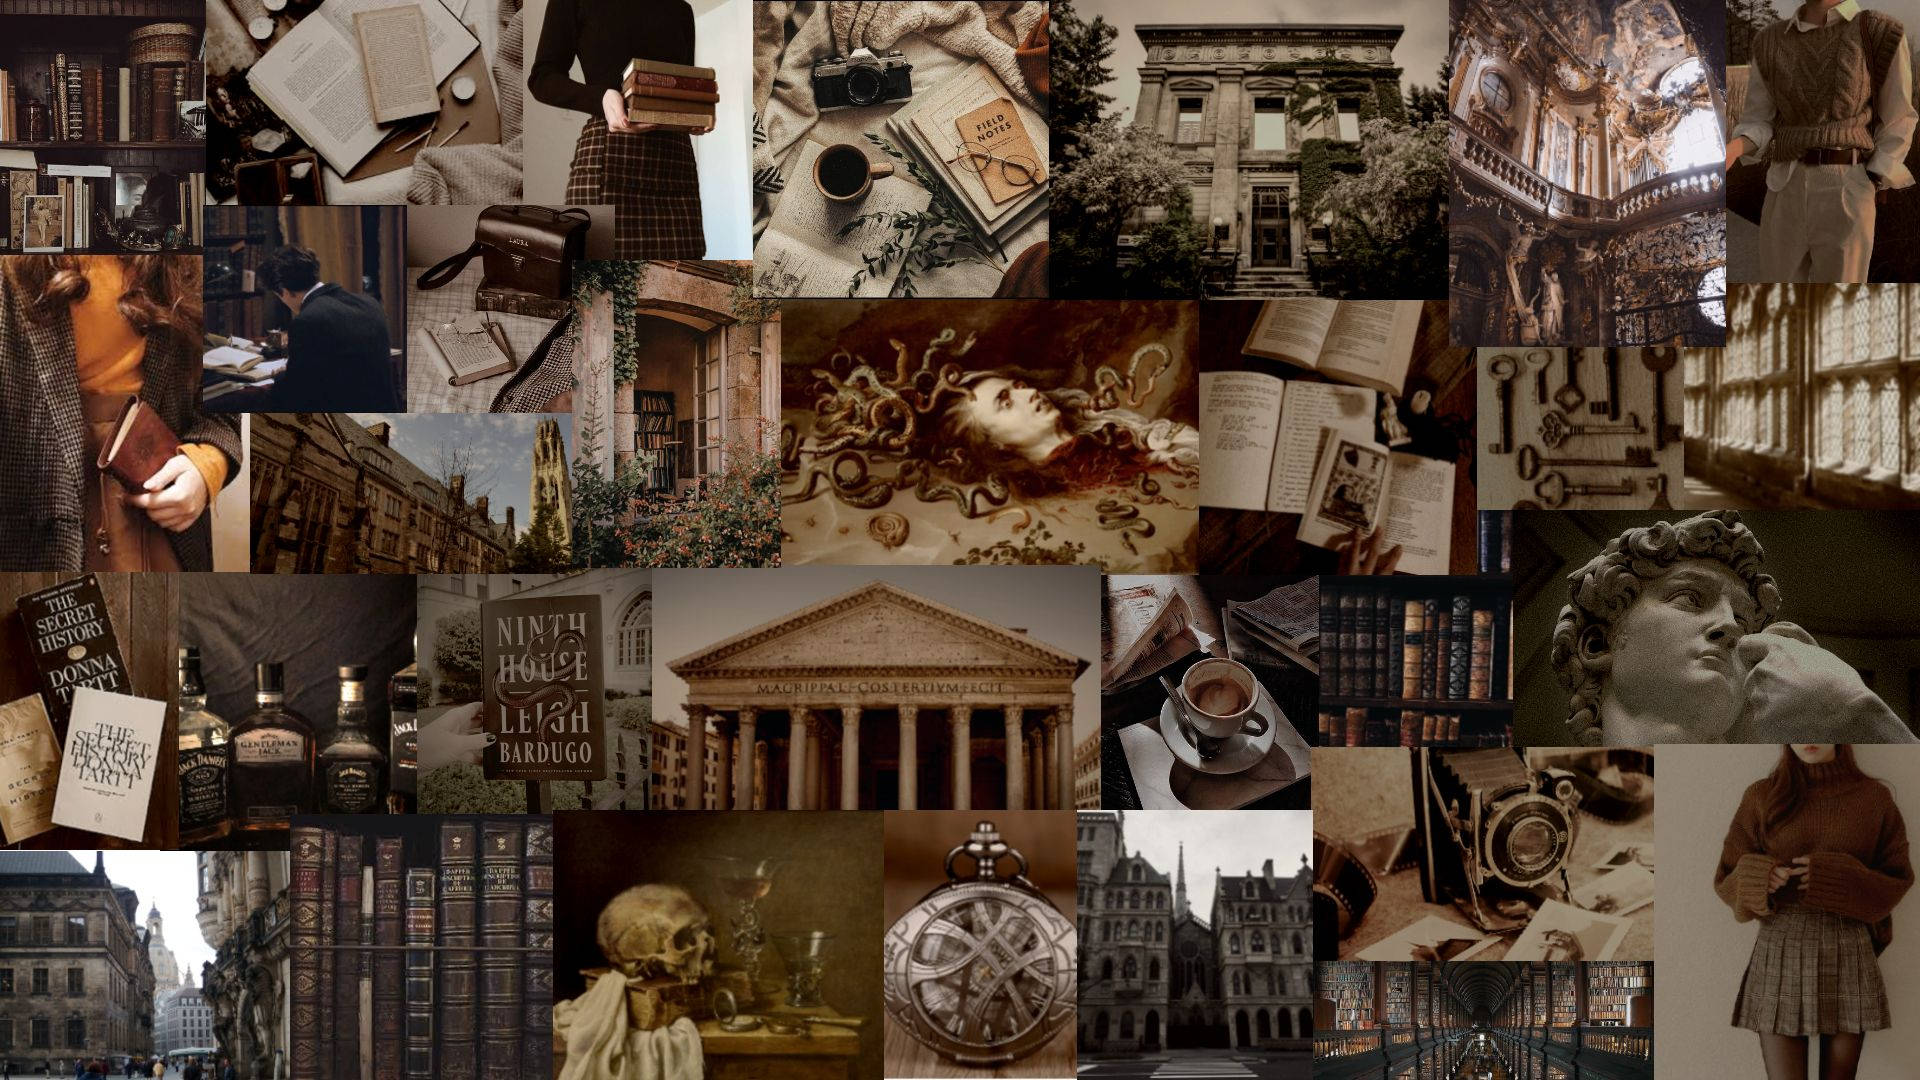 Aesthetic collage with a mix of book covers, antique photos, and vintage illustrations. - Dark academia, Greek mythology